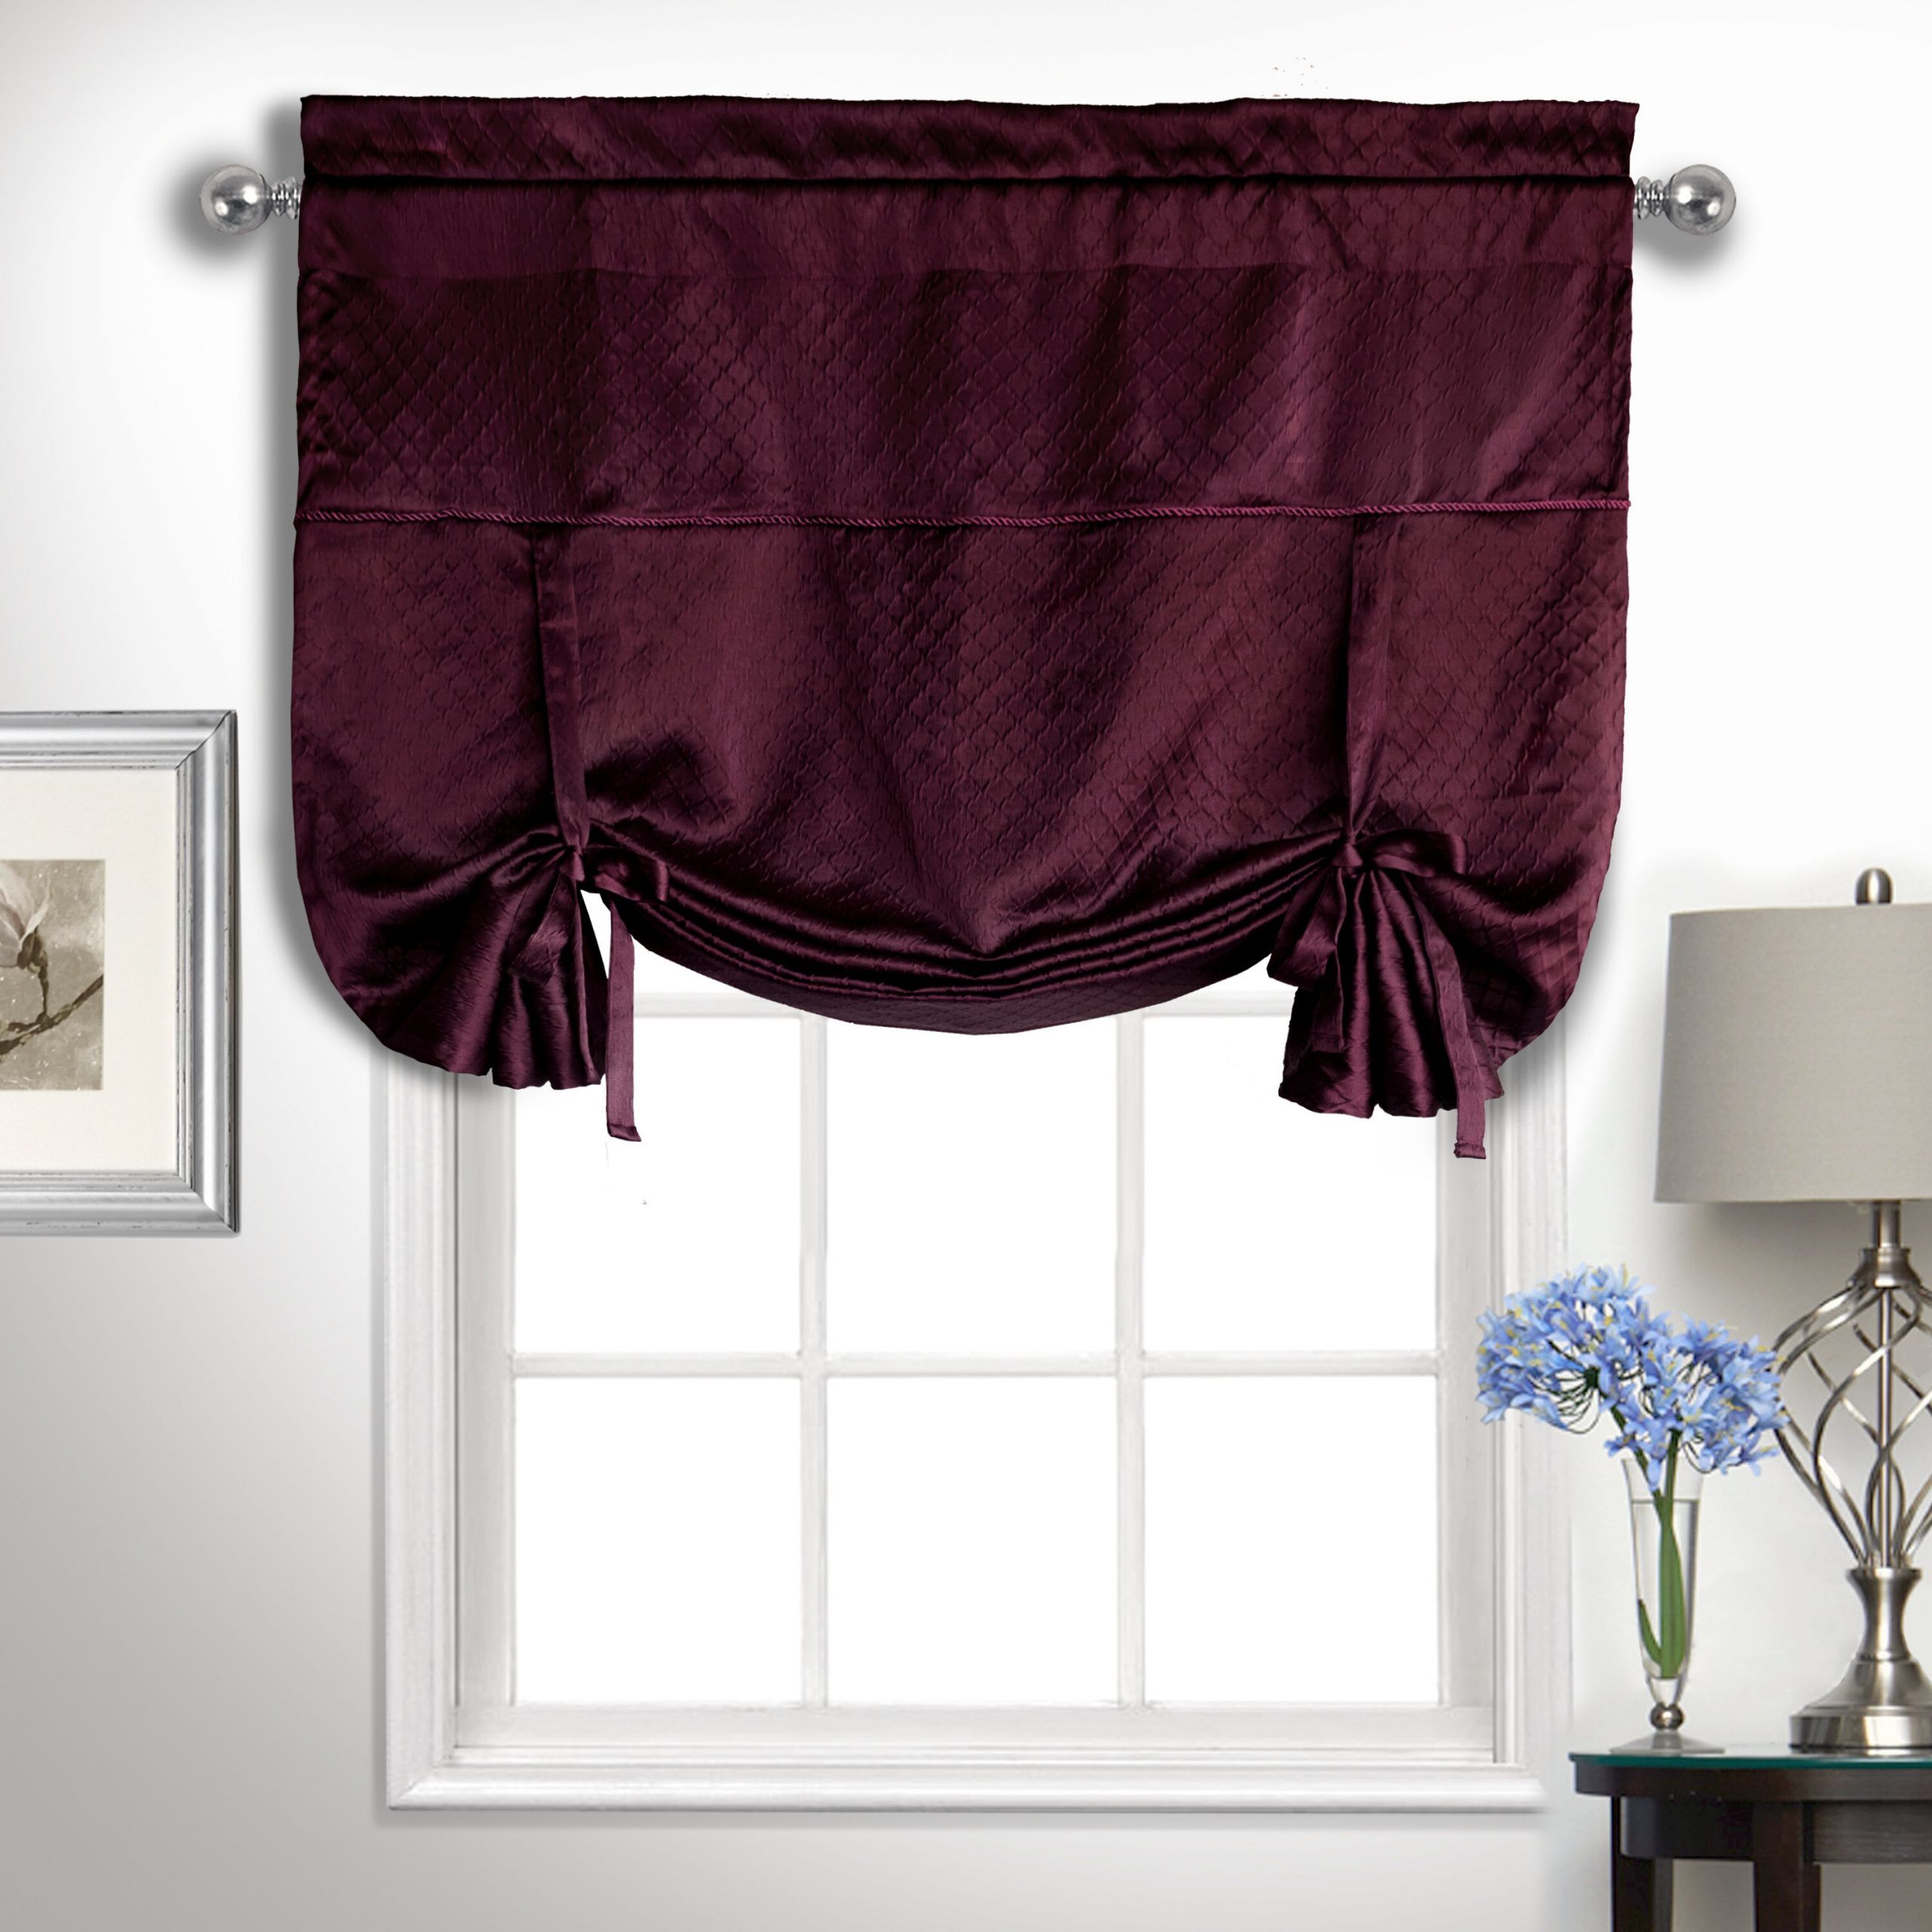 Solana Topper Curtain Valance Within Tailored Toppers With Valances (Photo 5 of 20)